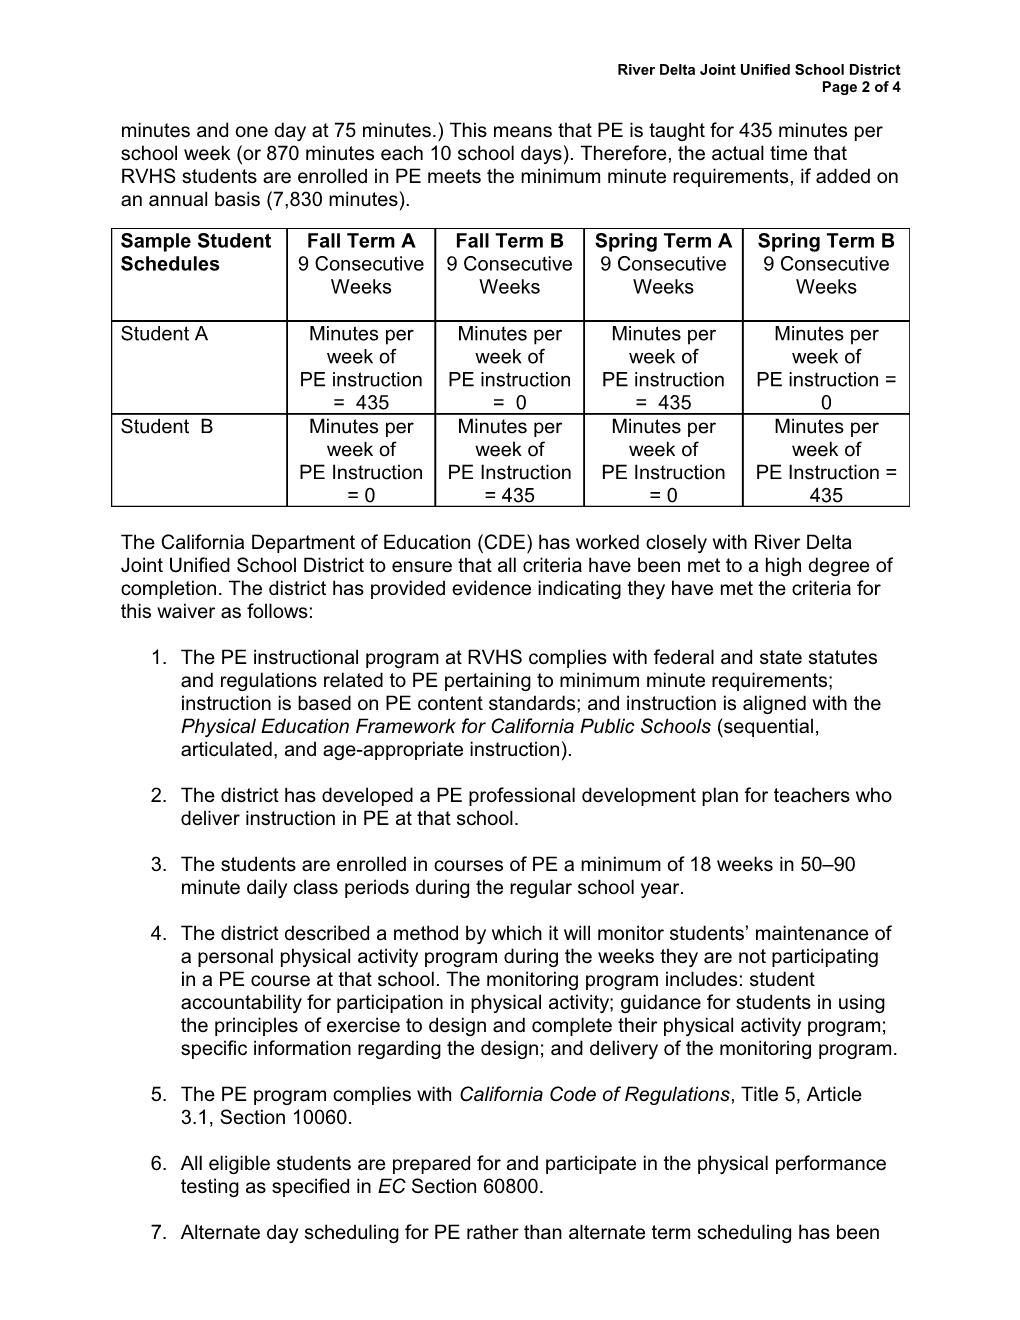 January 2015 Waiver Item W-02 - Meeting Agendas (CA State Board of Education)